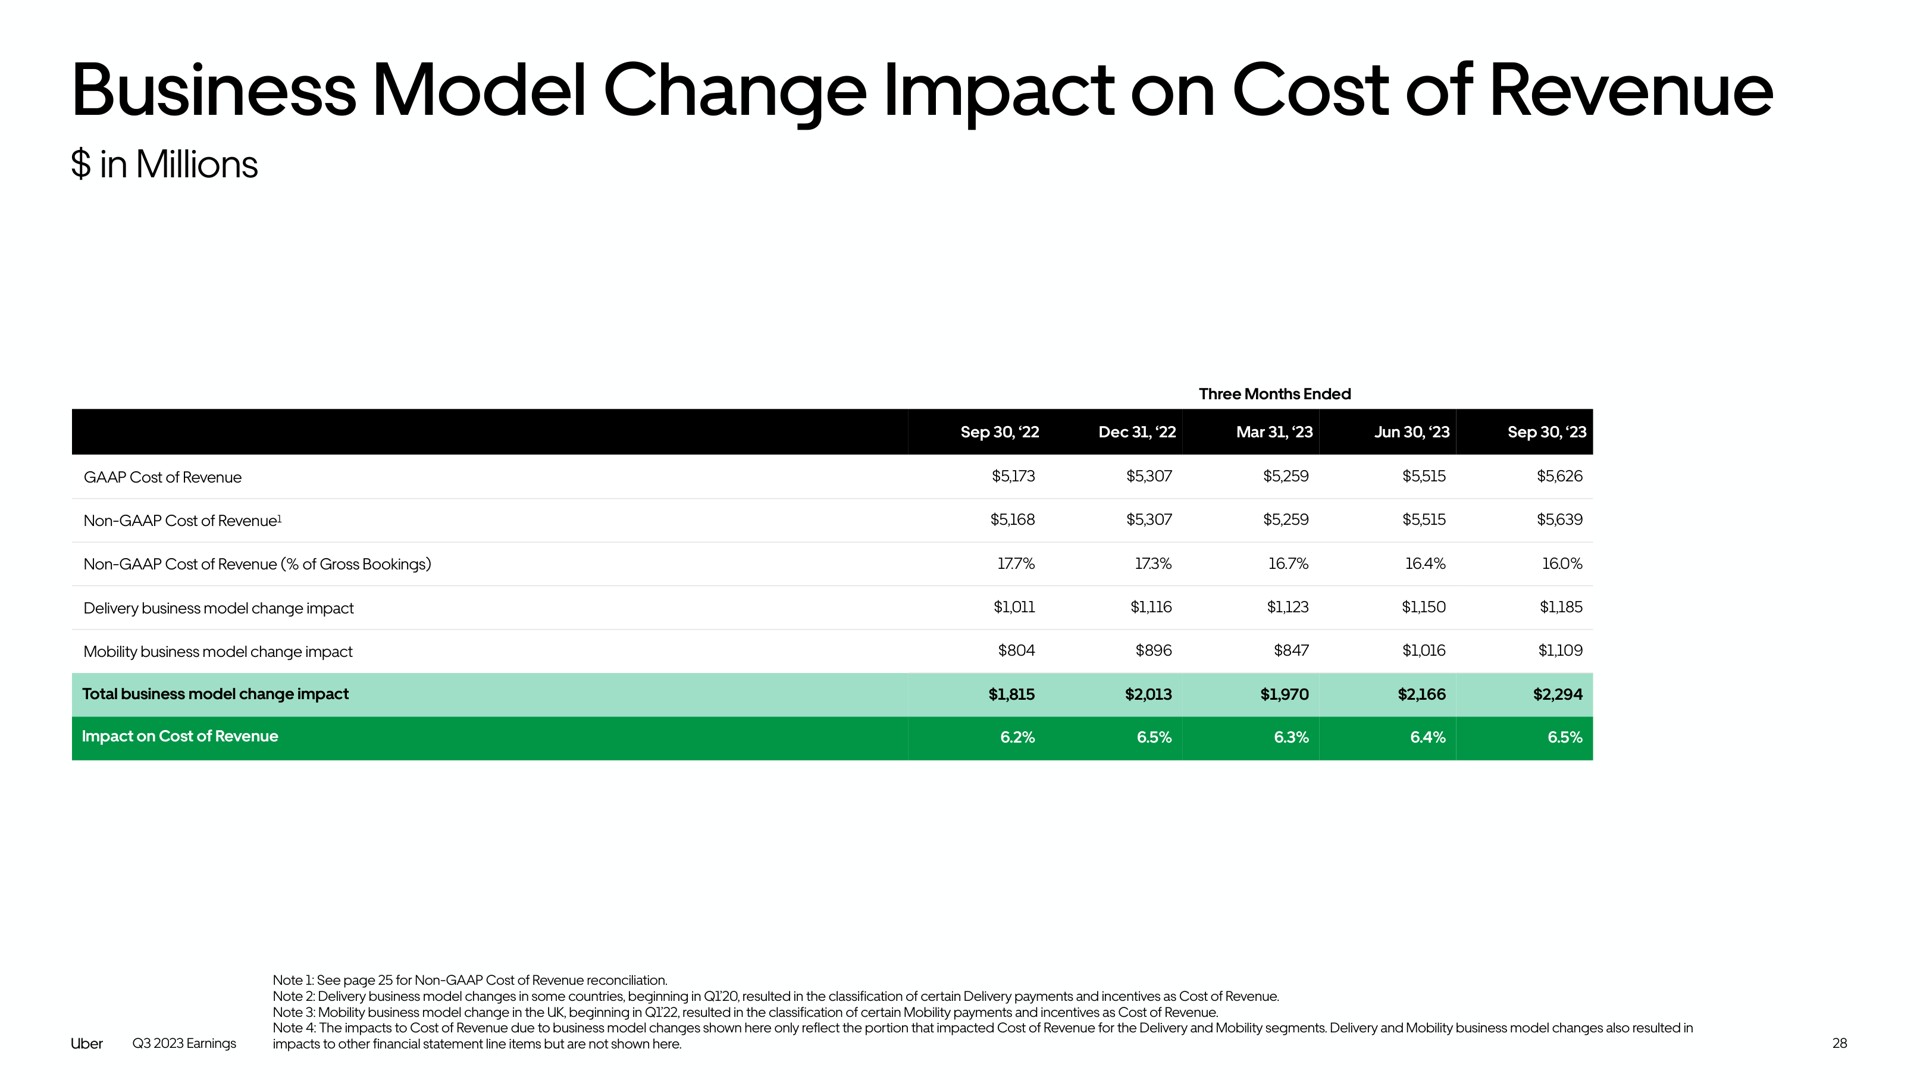 business model change impact on cost of revenue | Uber